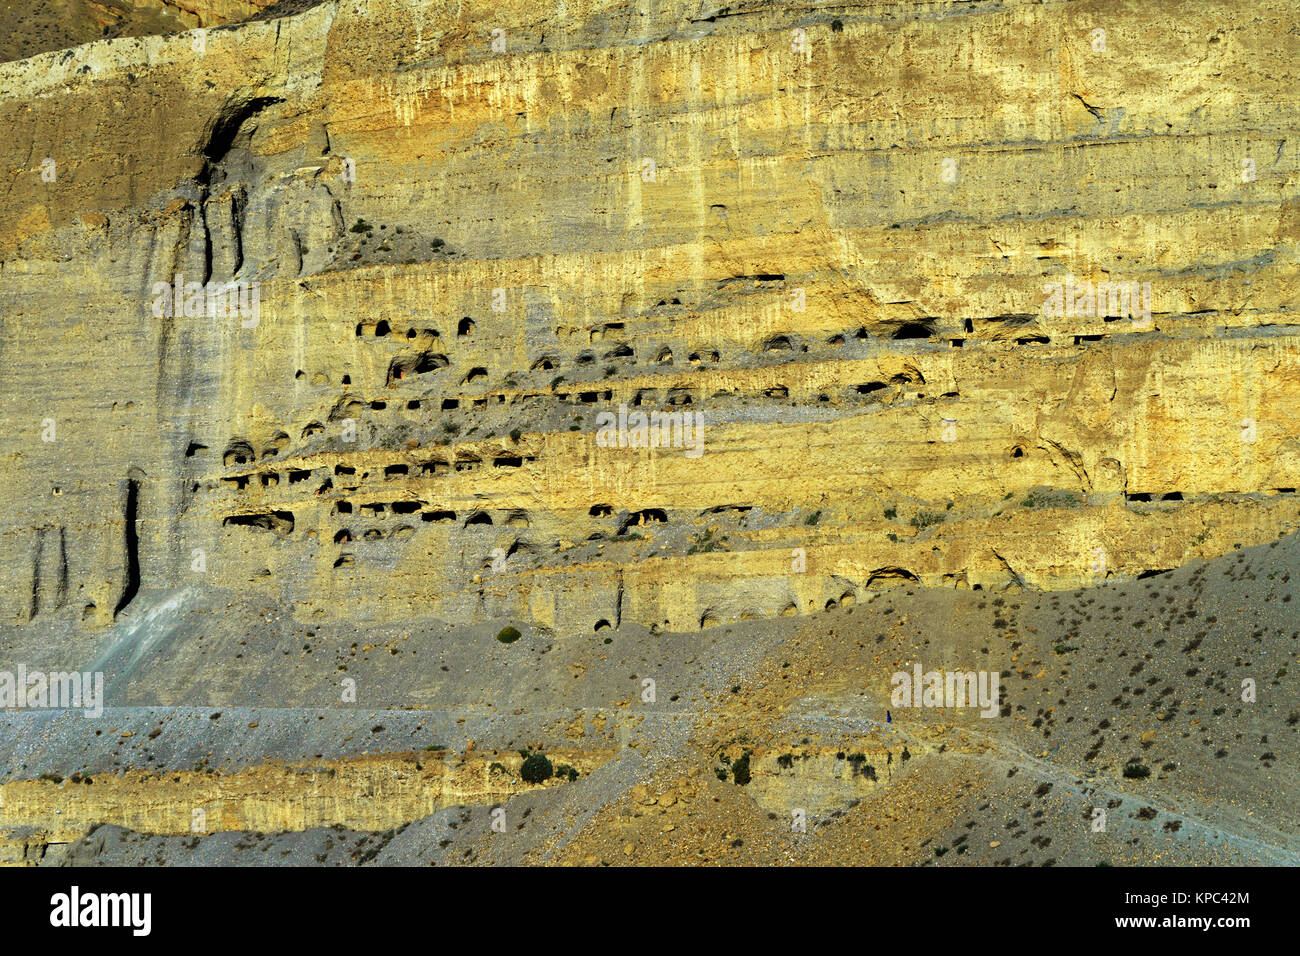 Ancient cave dwellings carved in a gigantic cliff above Chuksang, Upper Mustang. Minuscule silhouette of a traveler visible on low right hand side. Stock Photo